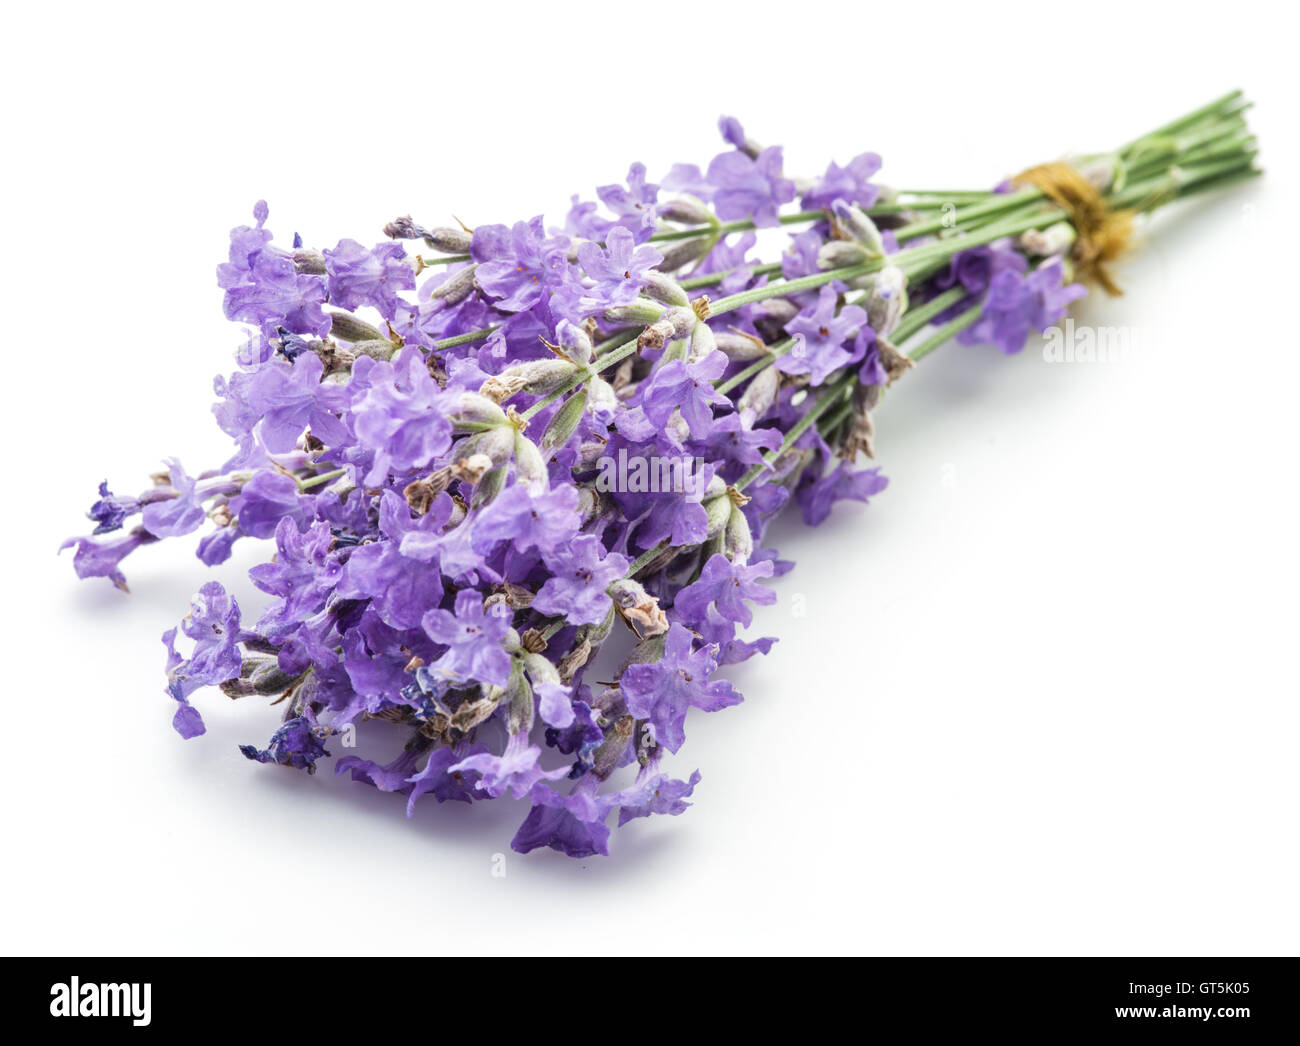 Bunch of lavandula or lavender flowers isolated on white background. Stock Photo